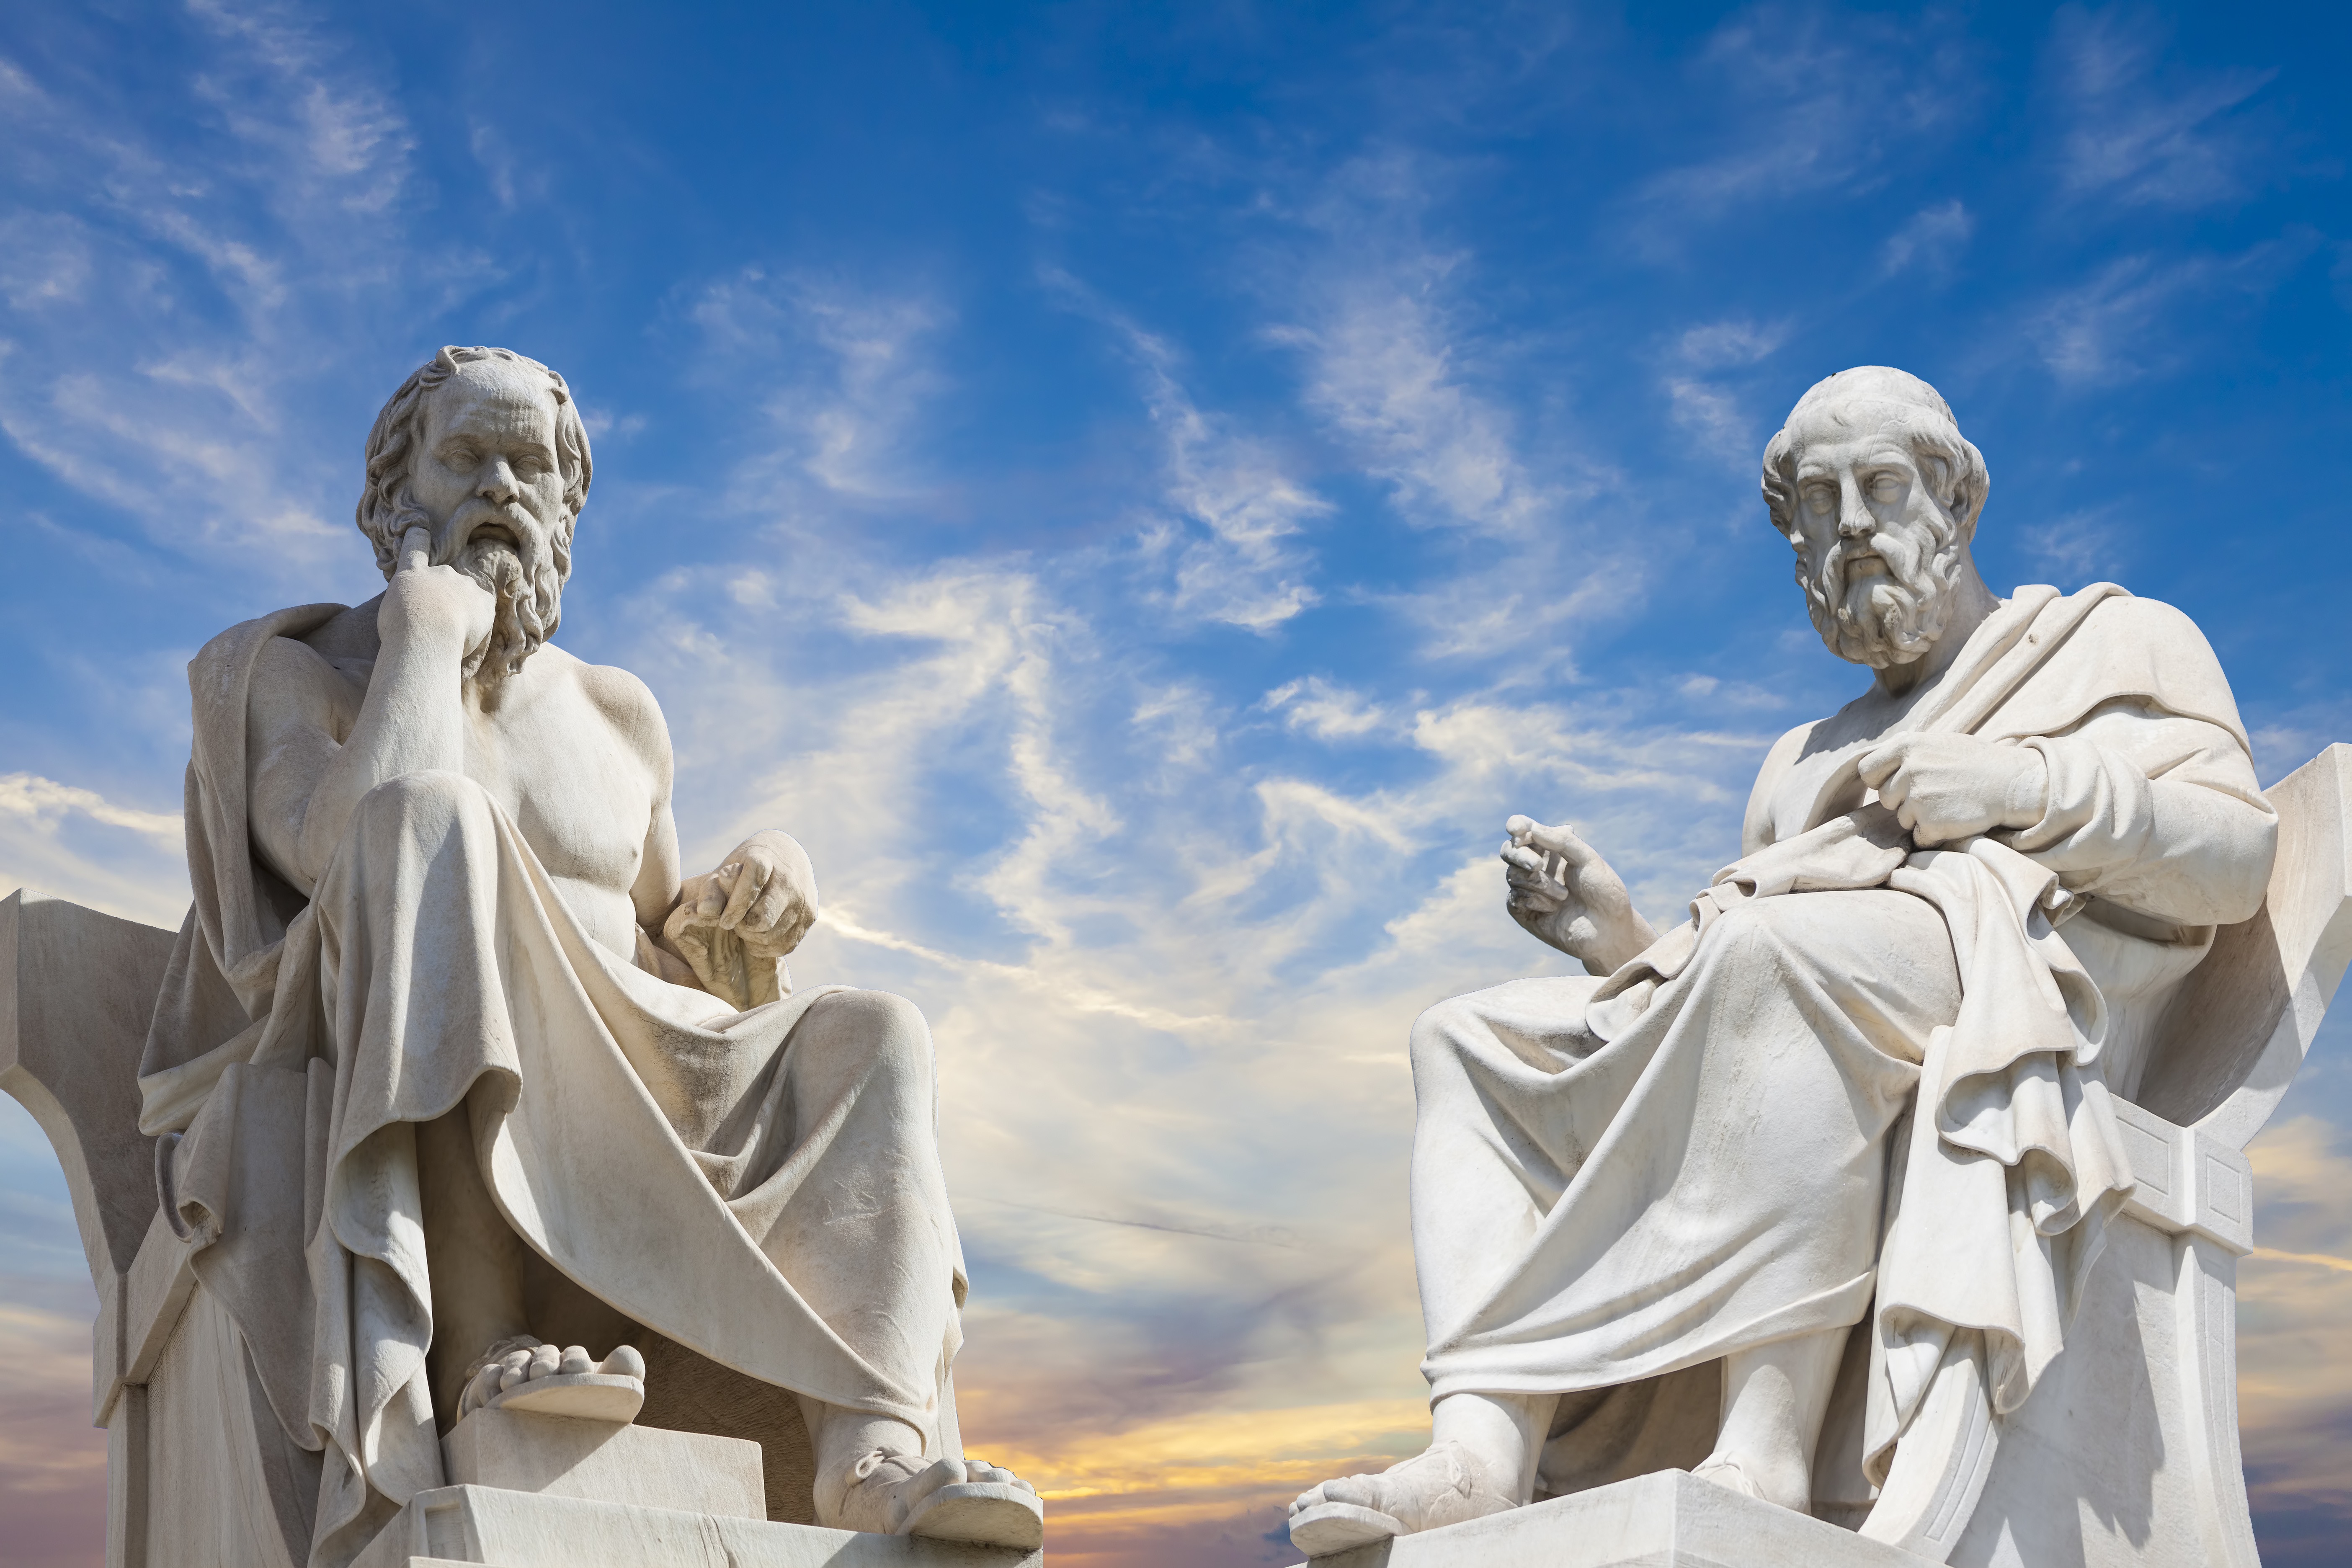 Interactive teaching dates back to Socrates and Plato